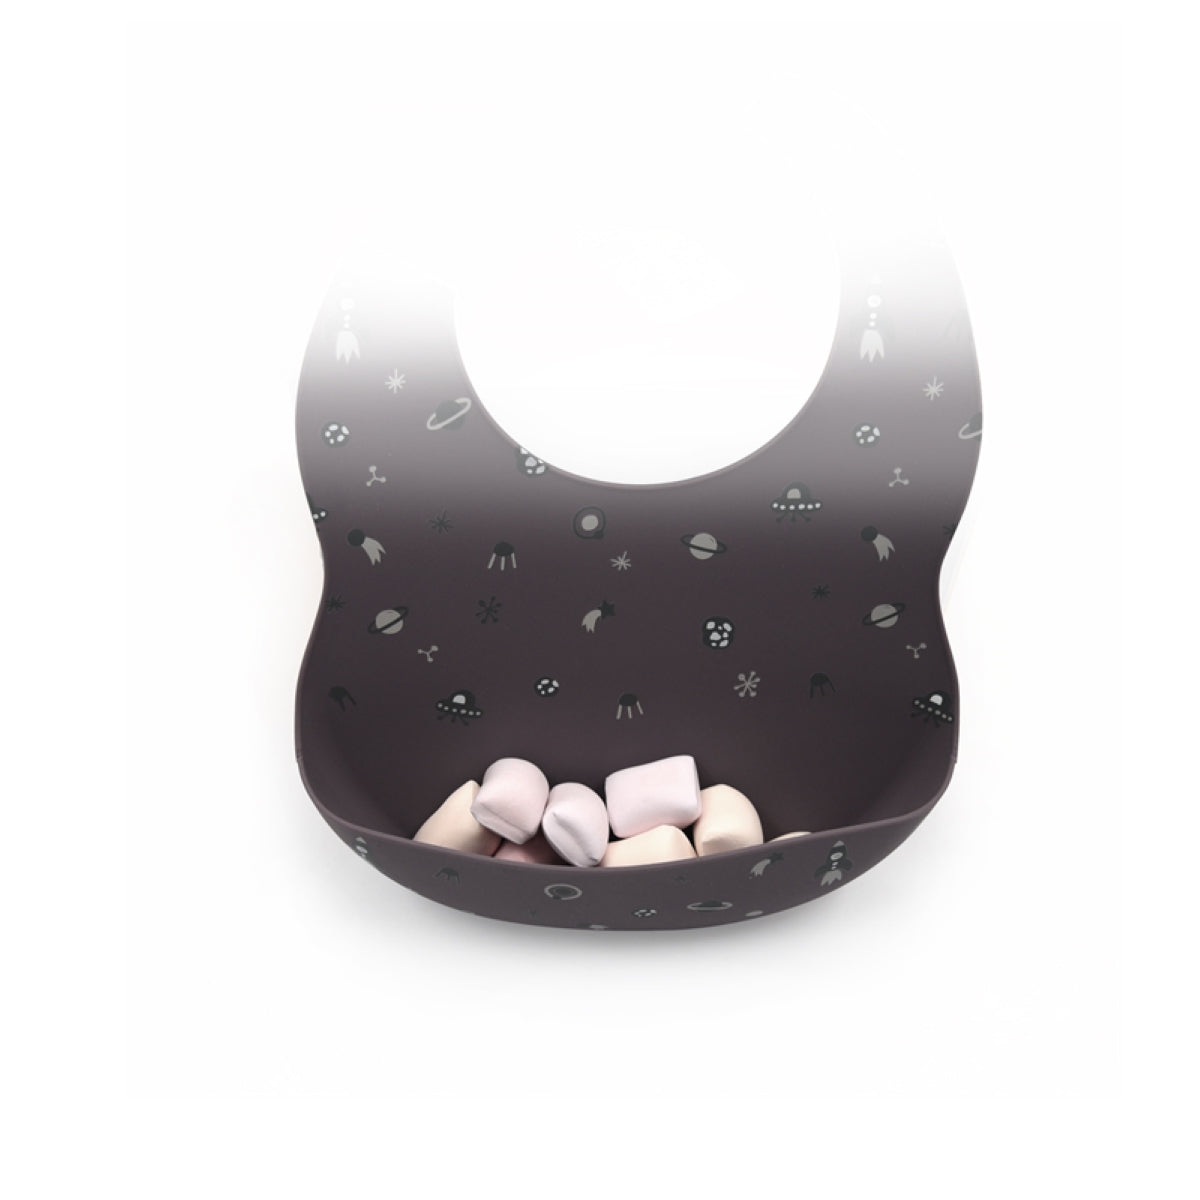 Silicone Baby Bib With Wide Pocket For Spills